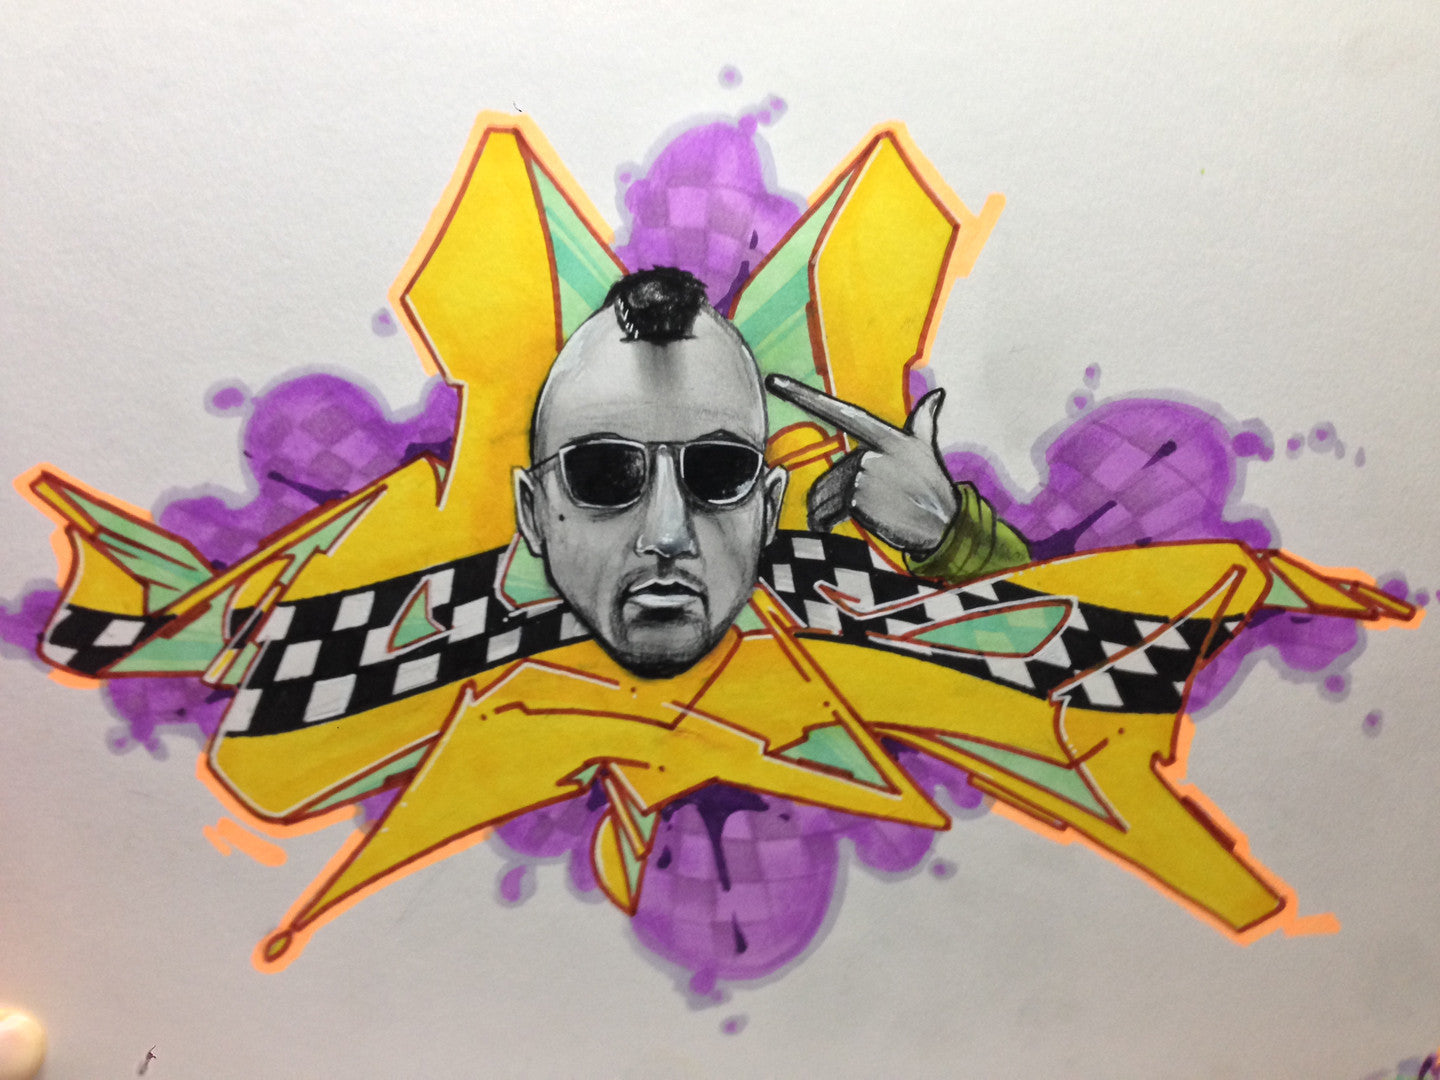 CES ONE- "TAXI" BlackBook Drawing